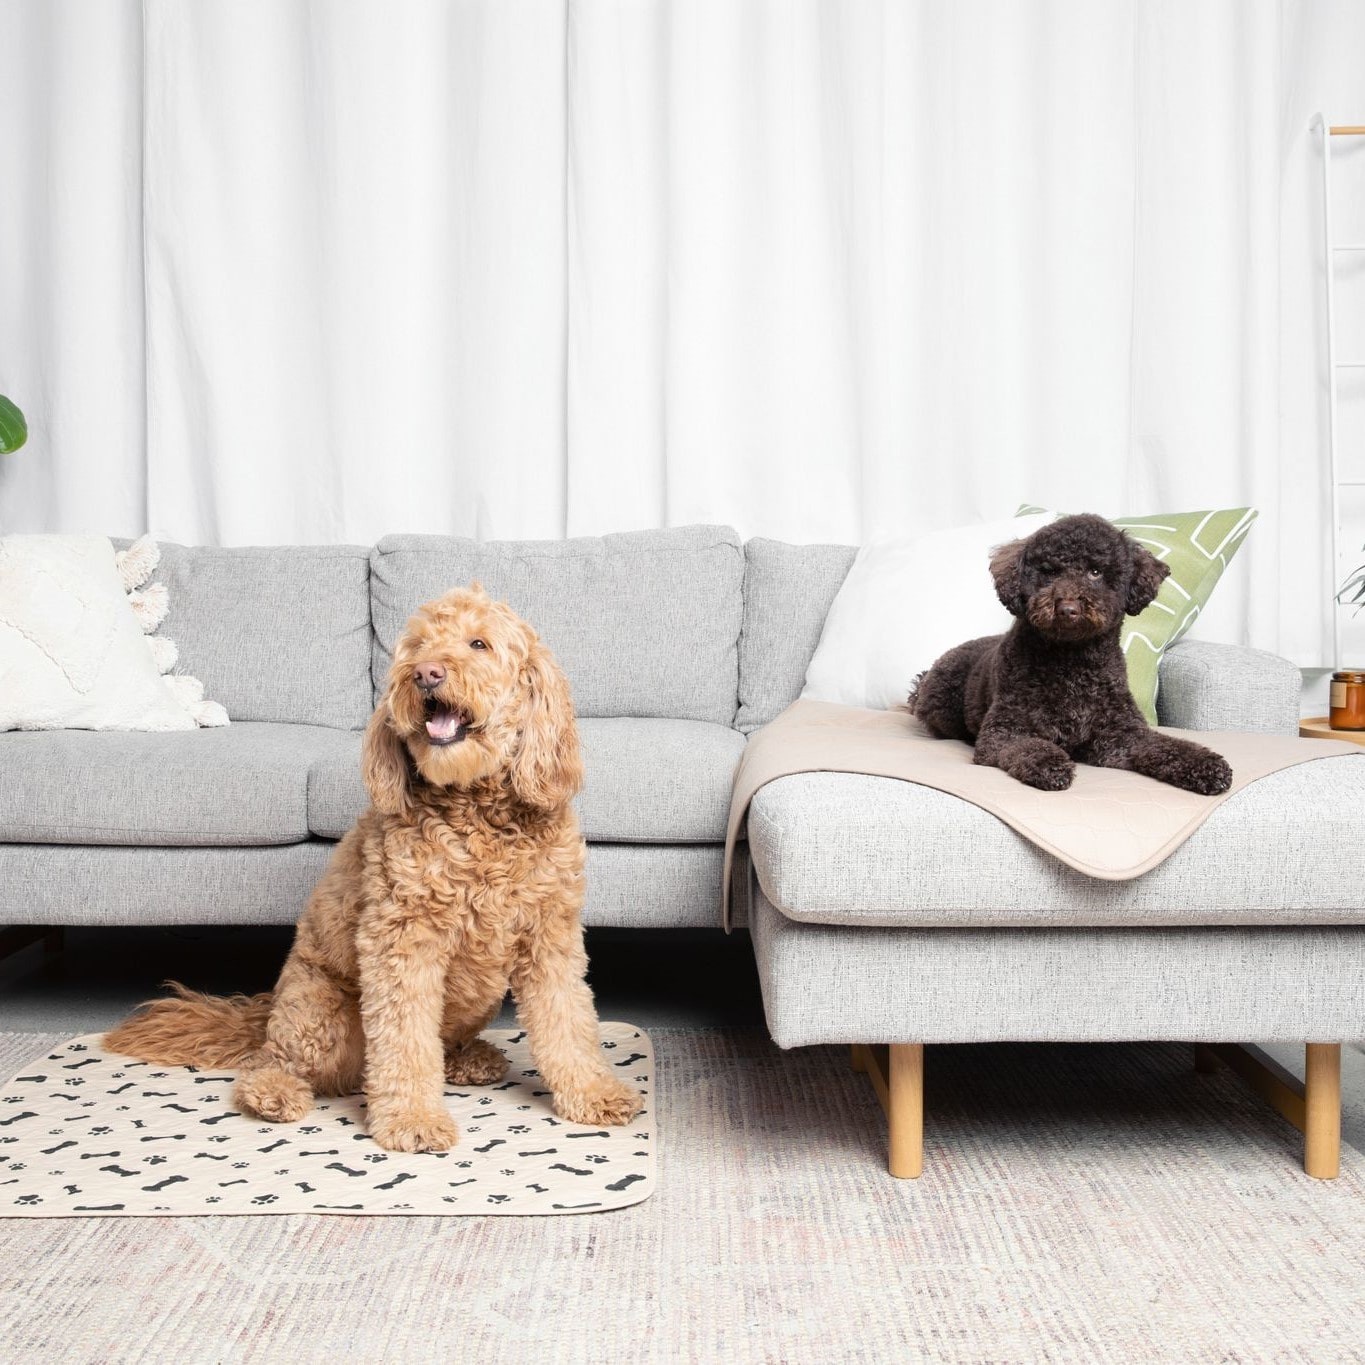 Two dogs relaxing in the living room